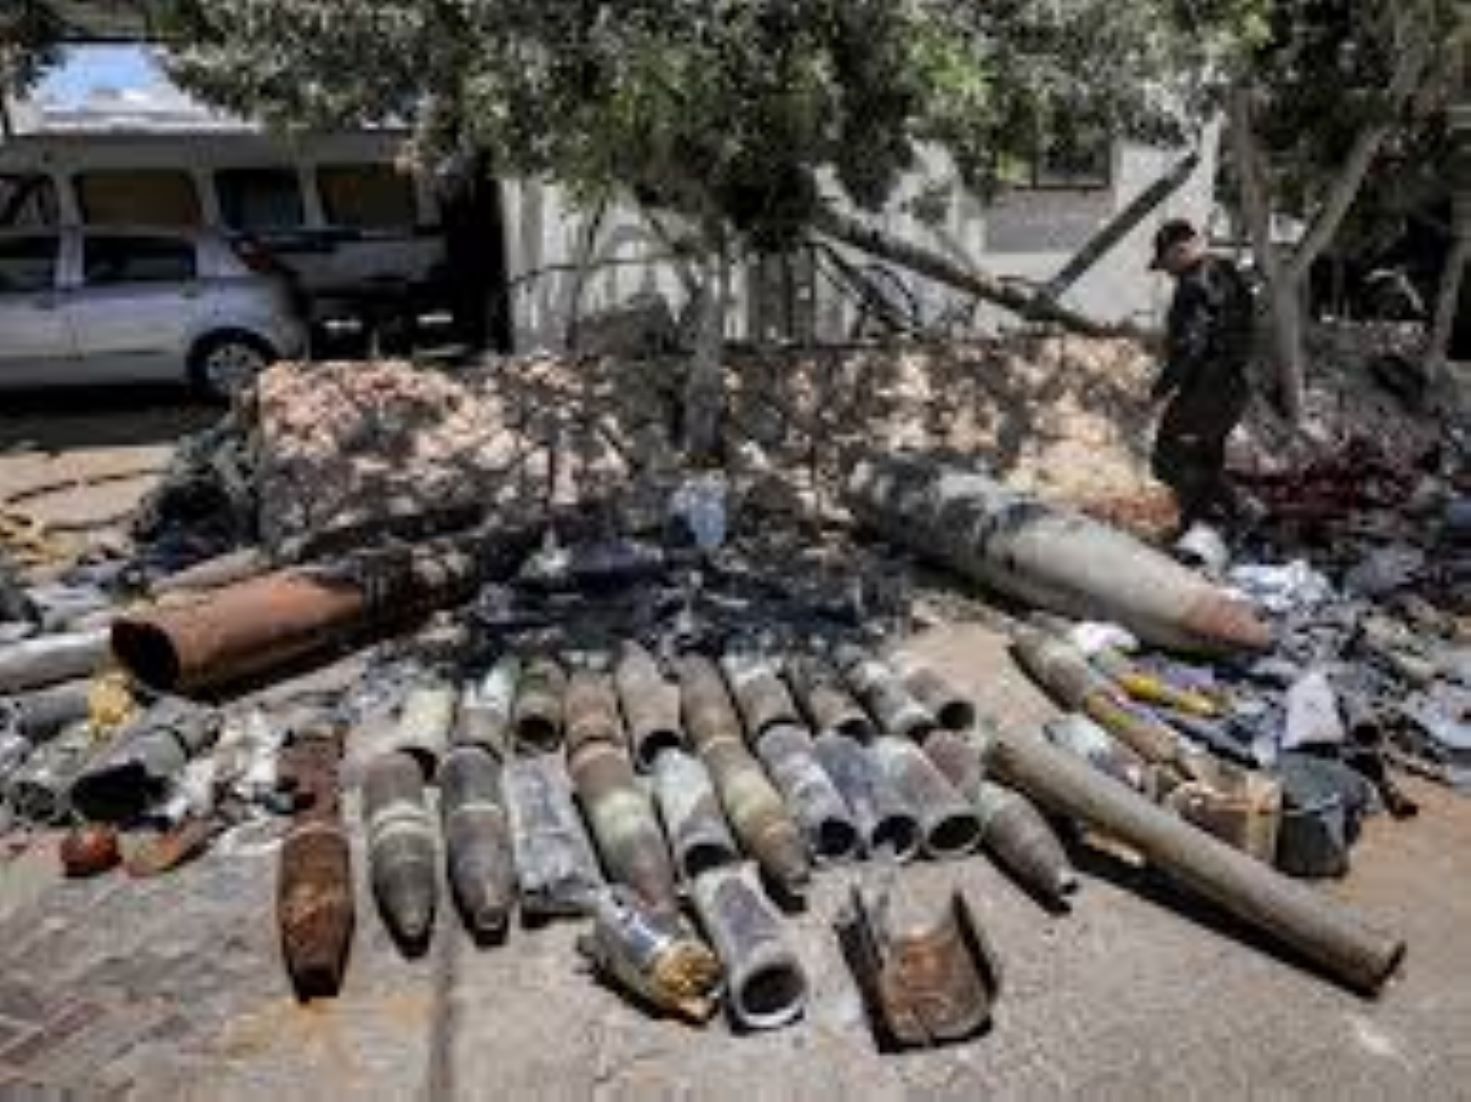 Unexploded Ordnance Poses Big Threat To People In Gaza: UN Body